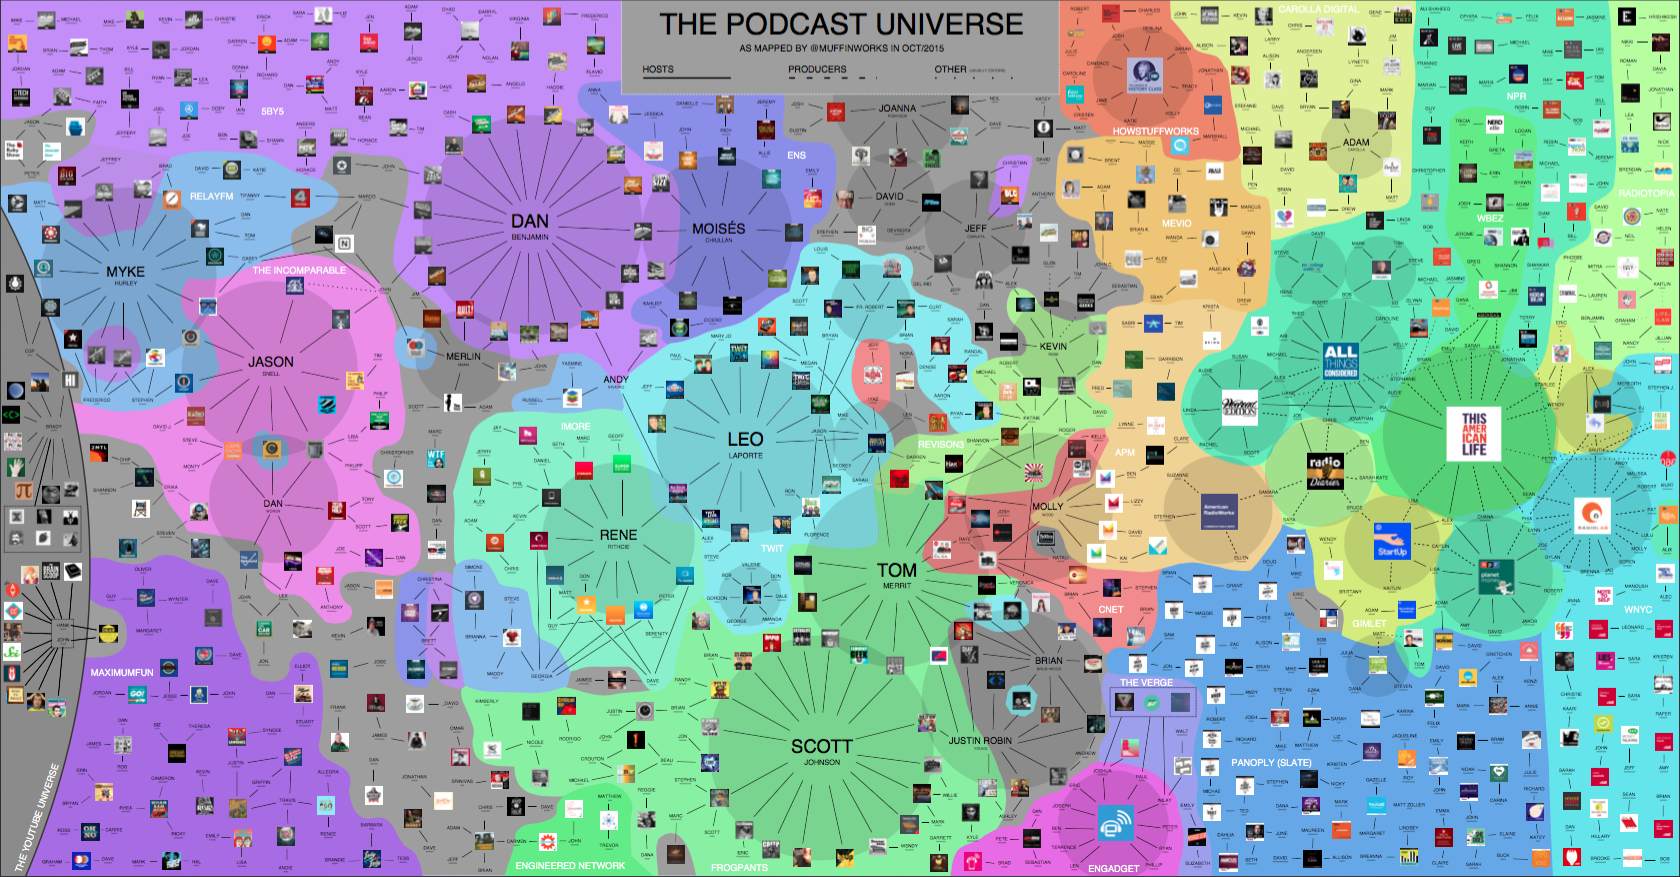 An image using colour, connecting lines, and groupings of images and text to show the connections between different podcasters, producers, and networks.